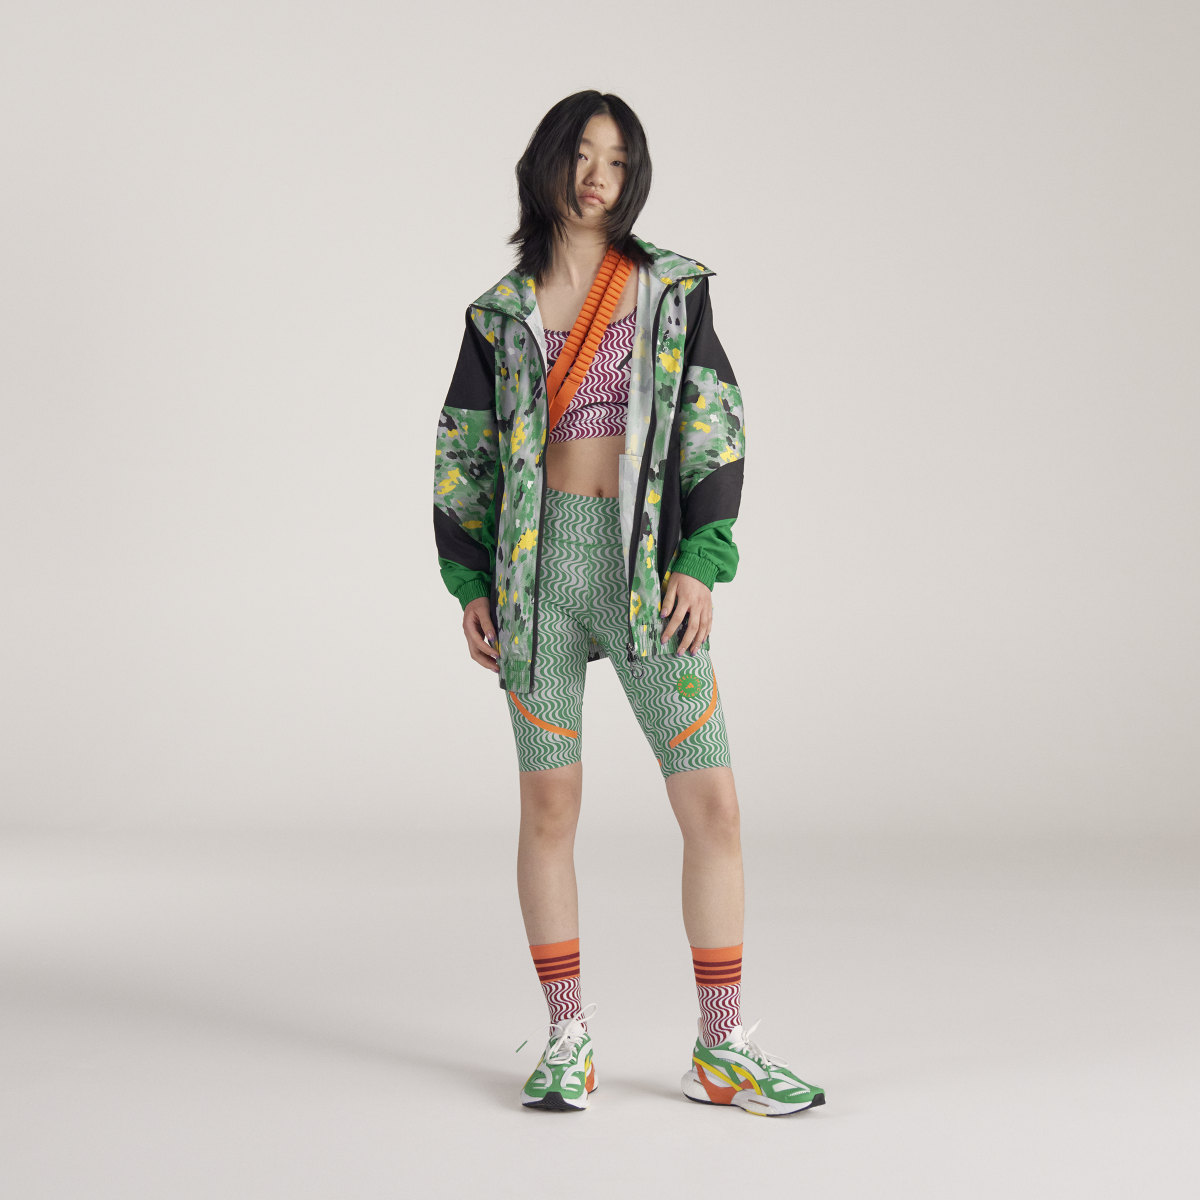 Adidas by Stella McCartney Printed Woven Track Top. 9